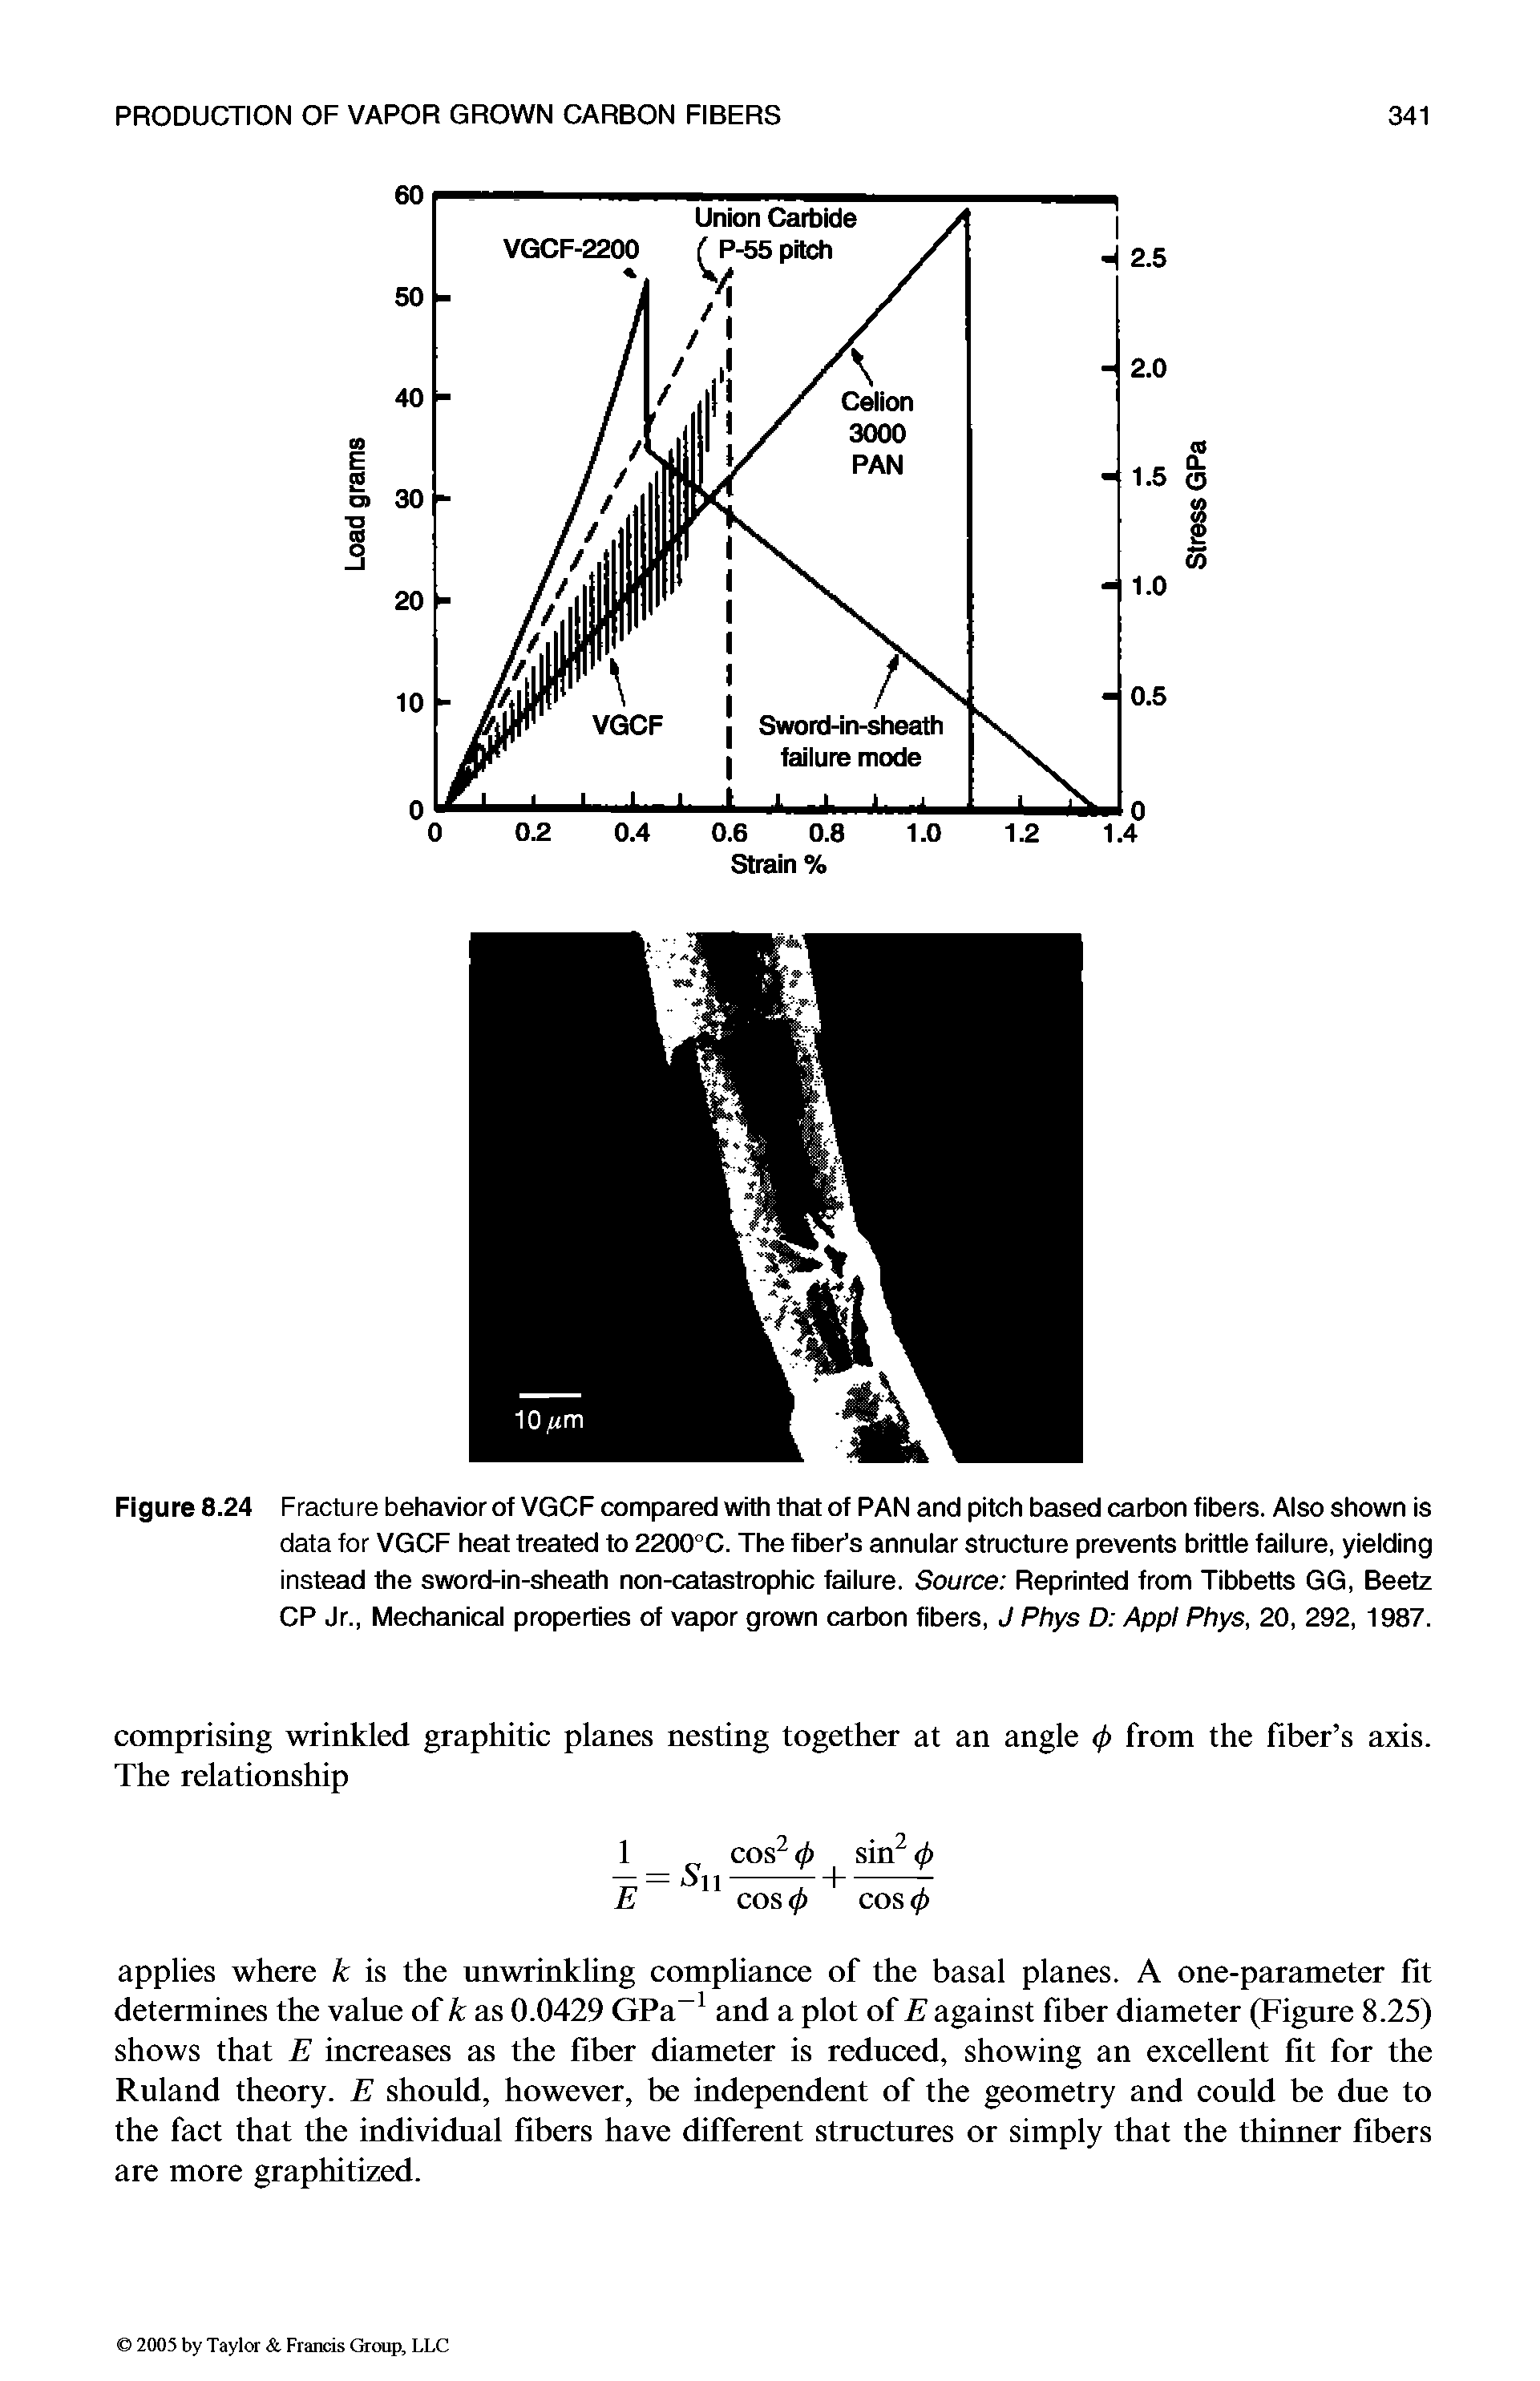 Figure 8.24 Fracture behavior of VGCF compared with that of PAN and pitch based carbon fibers. Also shown is data for VGCF heat treated to 2200°C. The fiber s annular structure prevents brittle failure, yielding instead the sword-in-sheath non-catastrophic failure. Source Reprinted from Tibbetts GG, Beetz CP Jr., Mechanical properties of vapor grown carbon fibers, J Phys D App Phys, 20, 292, 1987.